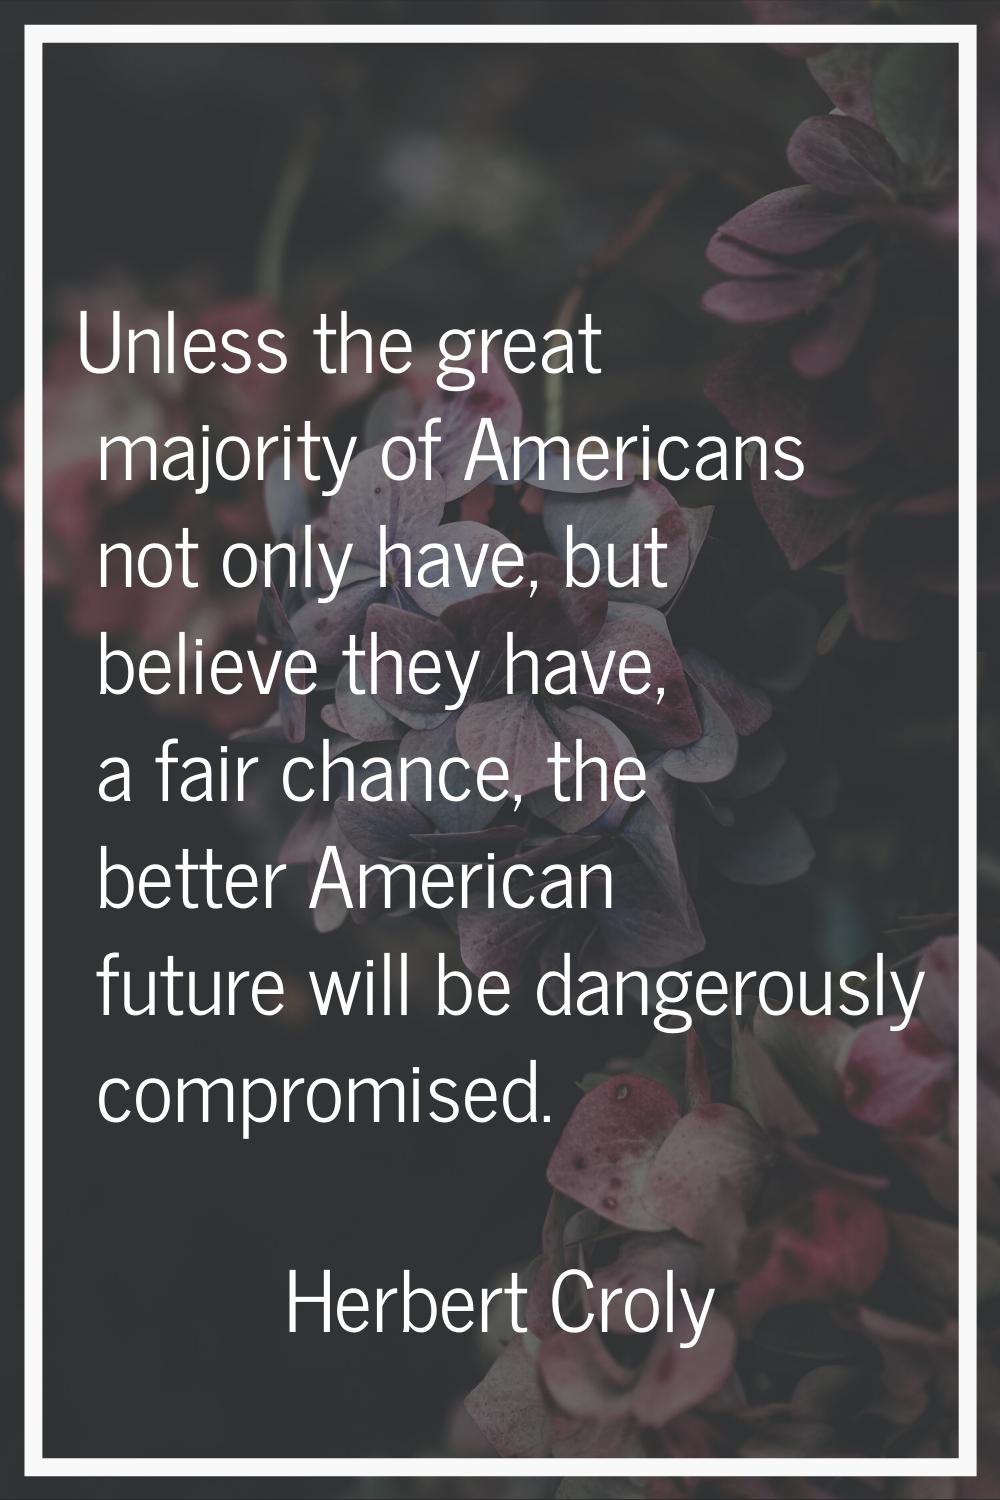 Unless the great majority of Americans not only have, but believe they have, a fair chance, the bet